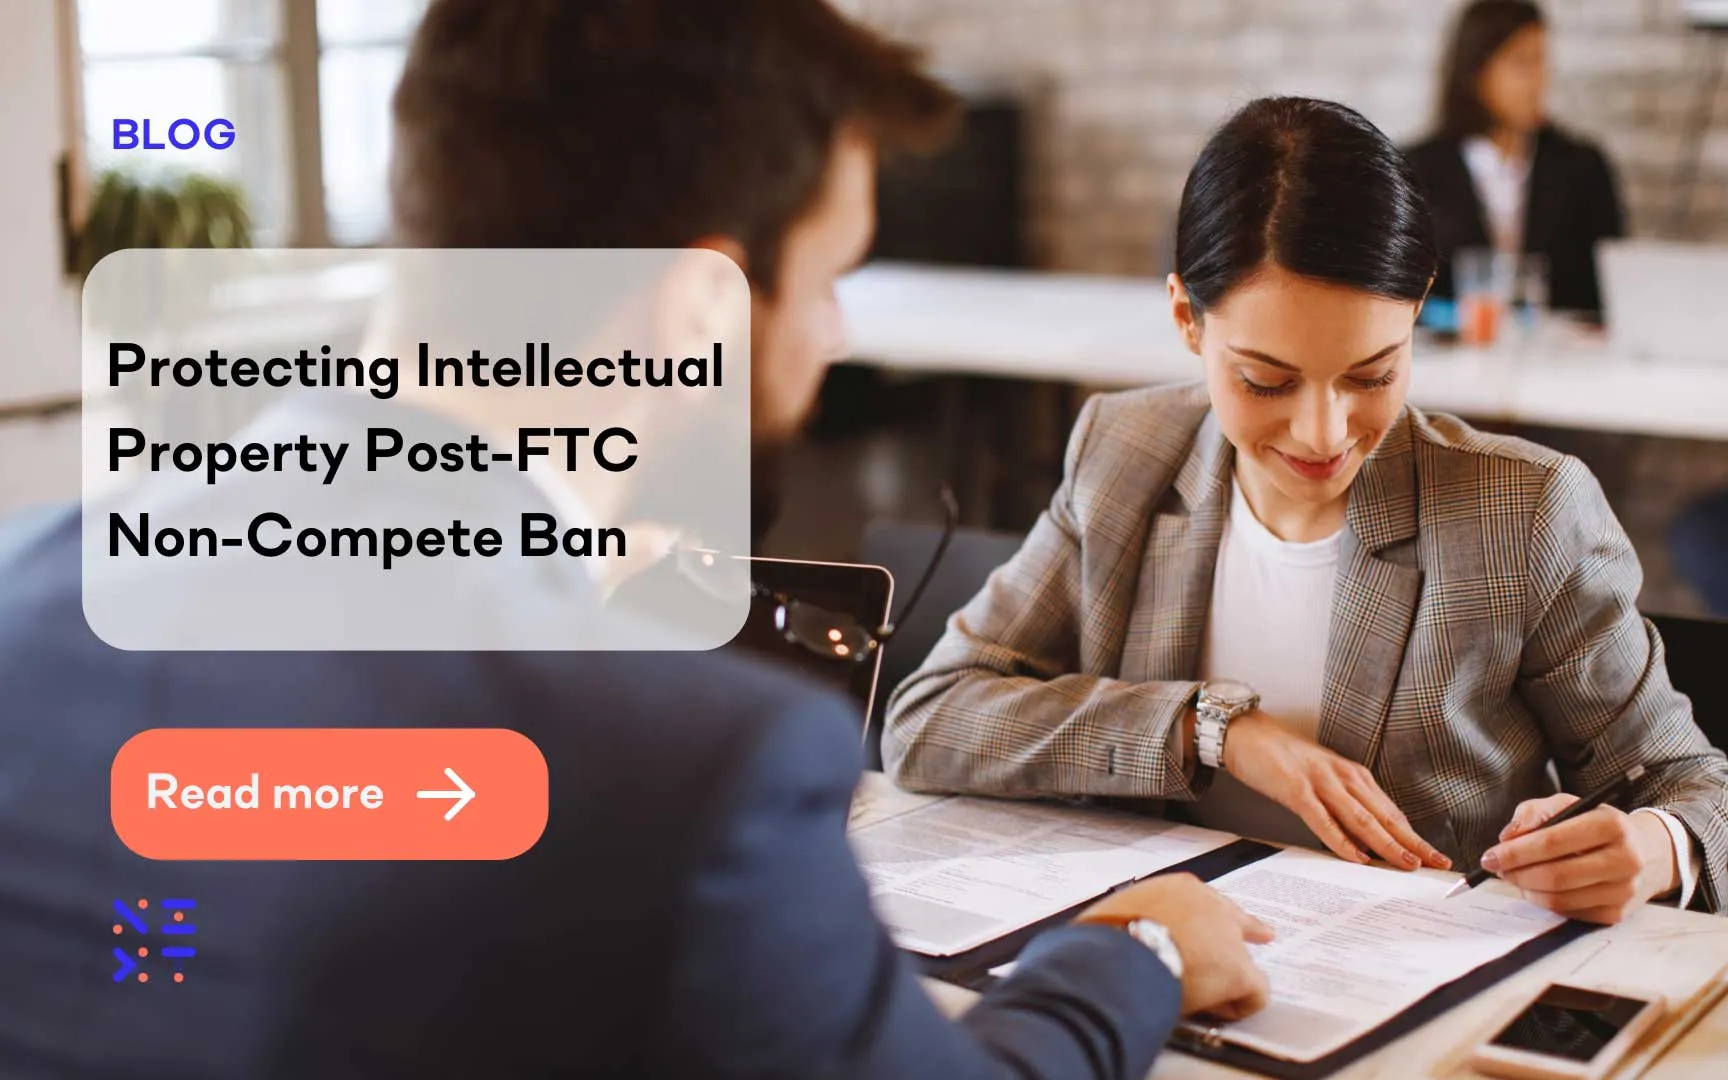 Protecting Intellectual Property Post-FTC Non-Compete Ban